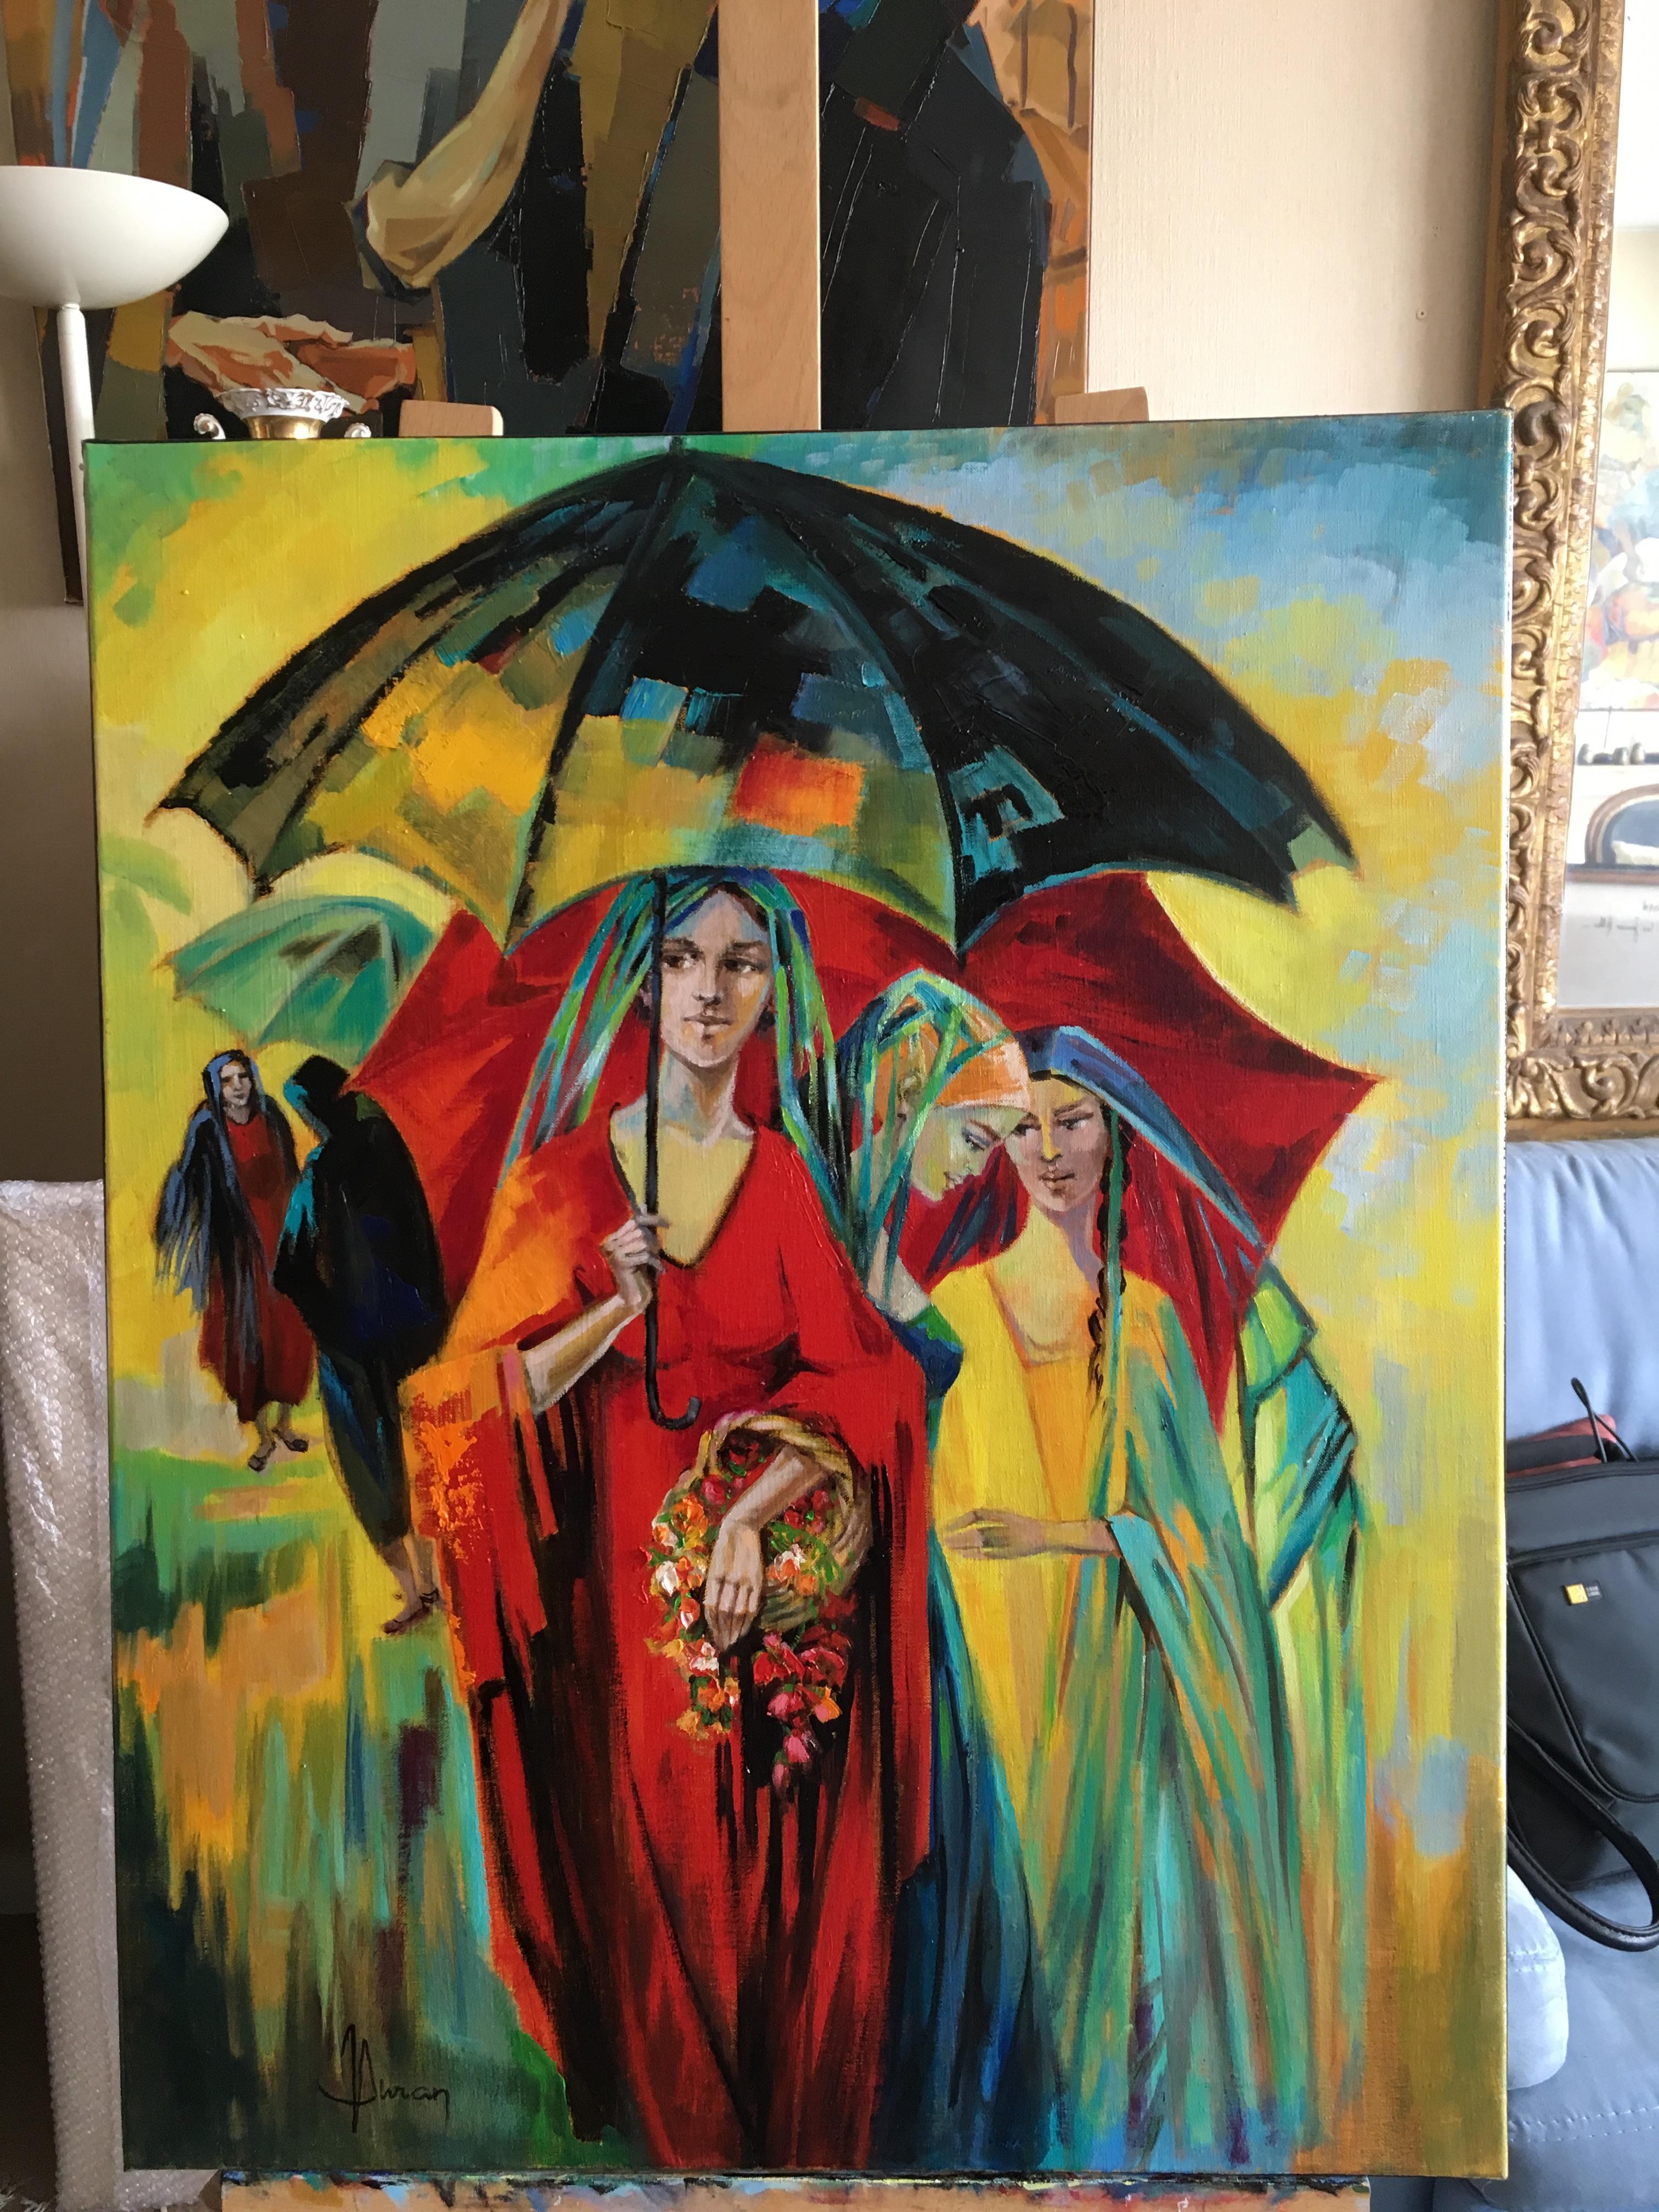 The umbrellas, oil on canvas, expressionist style 3